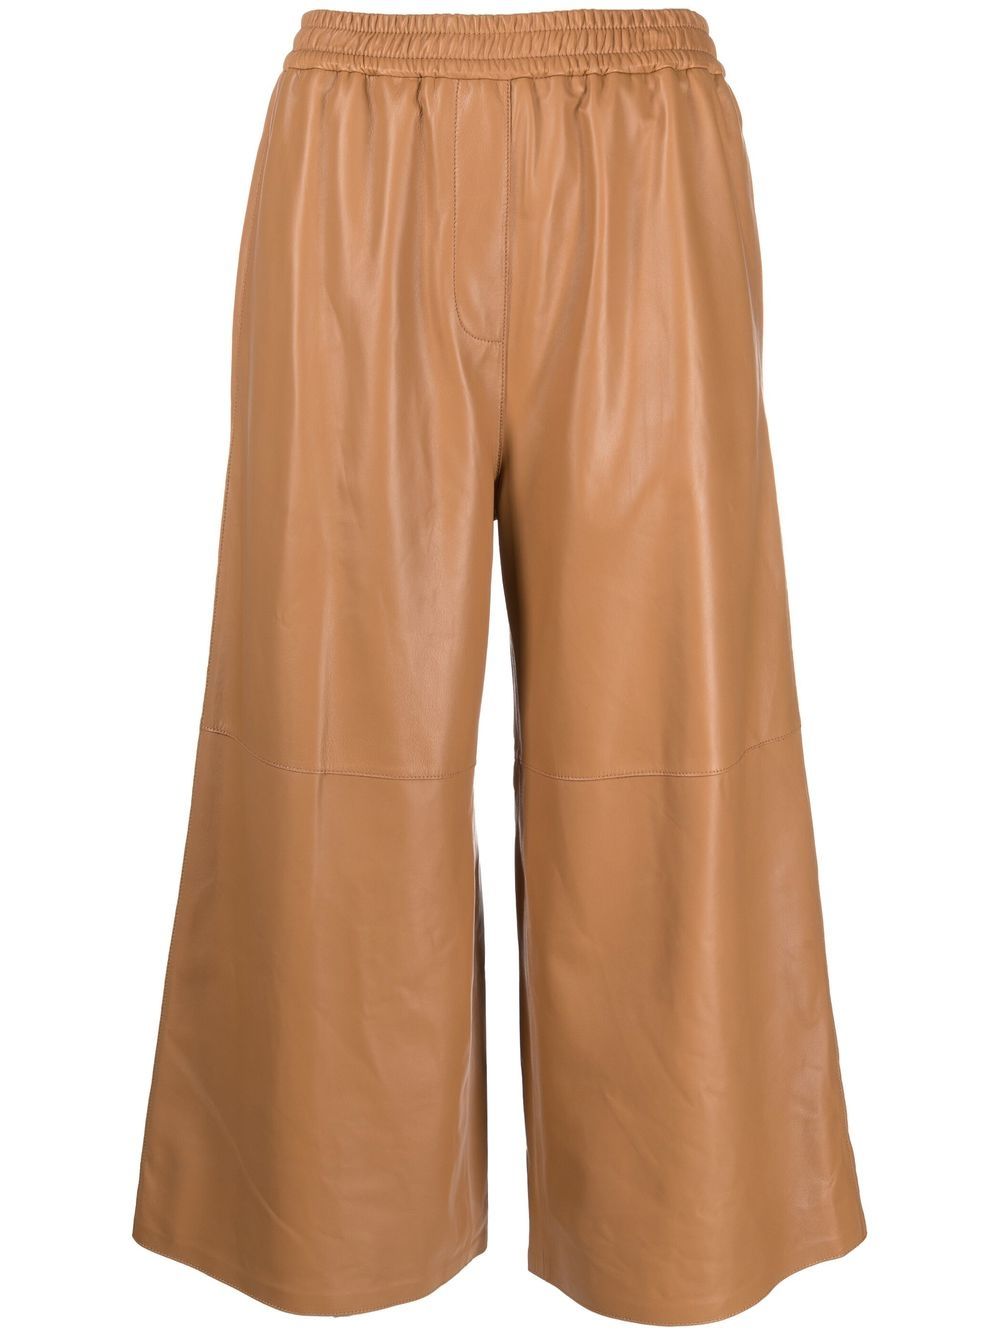 LOEWE- Cropped Leather Trousers